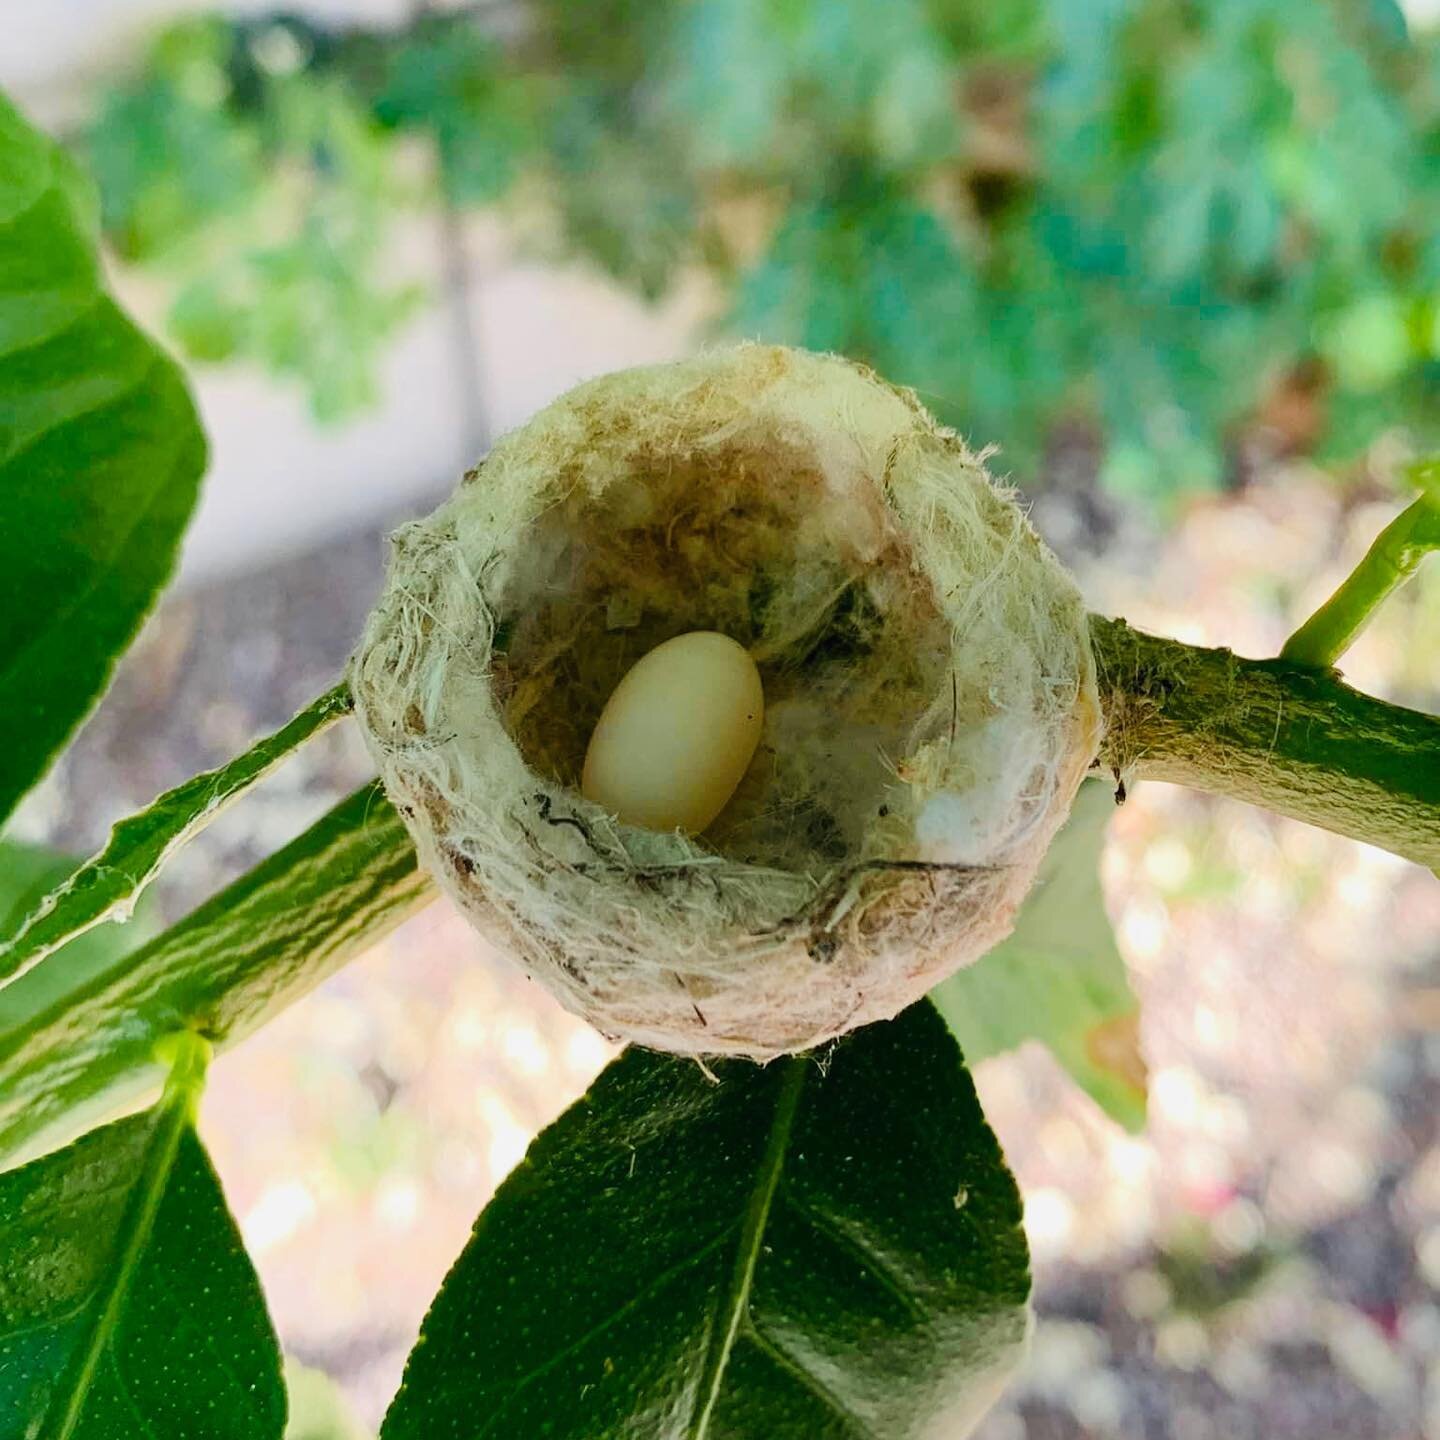 This precious hummingbird nest is a reminder that it is nesting season through about August. Trimming your shrubs and hedges right now may jeopardize these nests so please consider holding off until September. Our bird neighbors thank you 🙏 
.
Photo